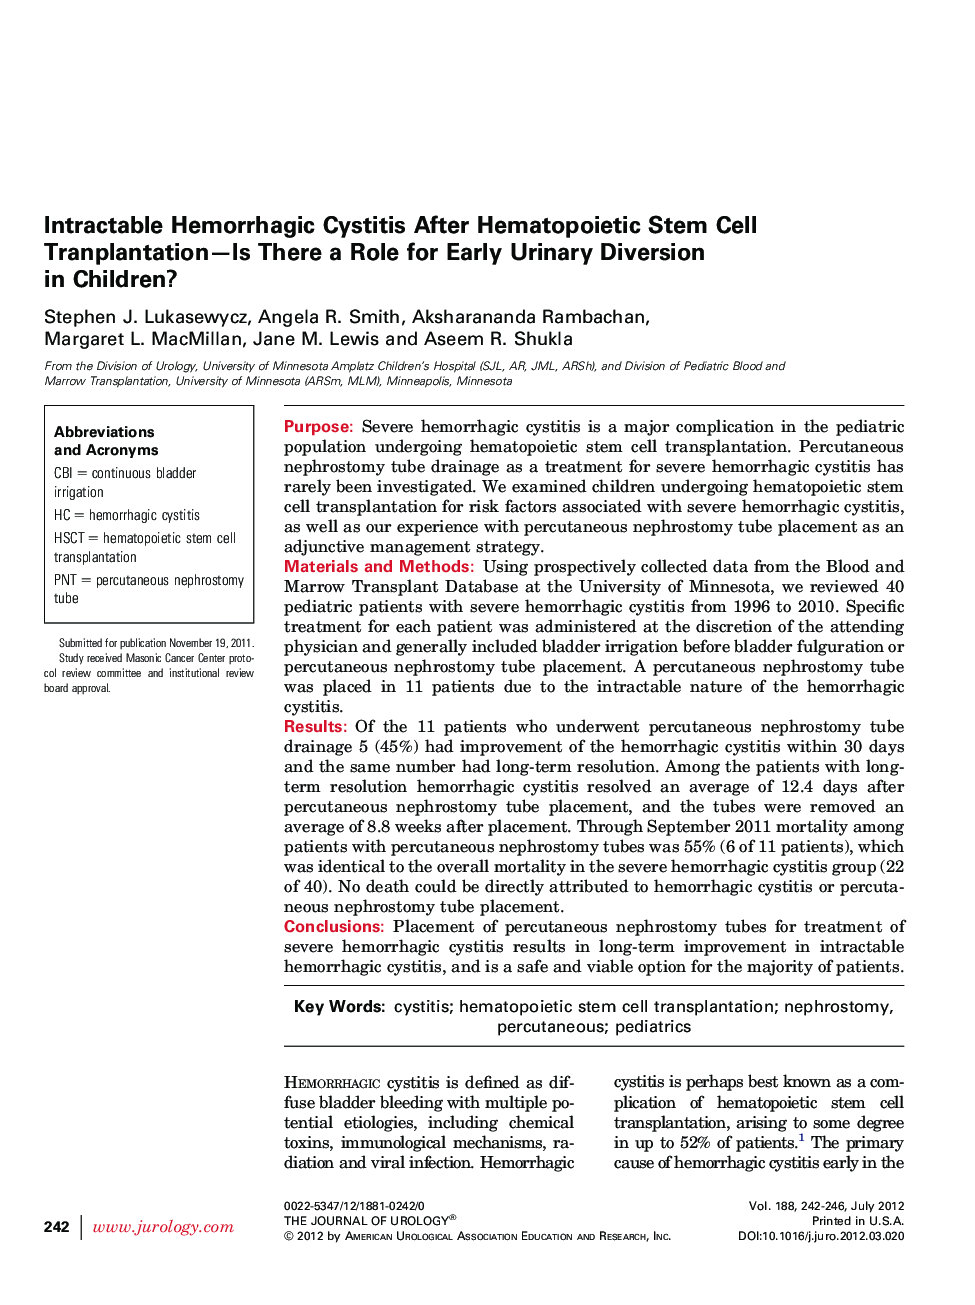 Intractable Hemorrhagic Cystitis After Hematopoietic Stem Cell Tranplantation—Is There a Role for Early Urinary Diversion in Children? 